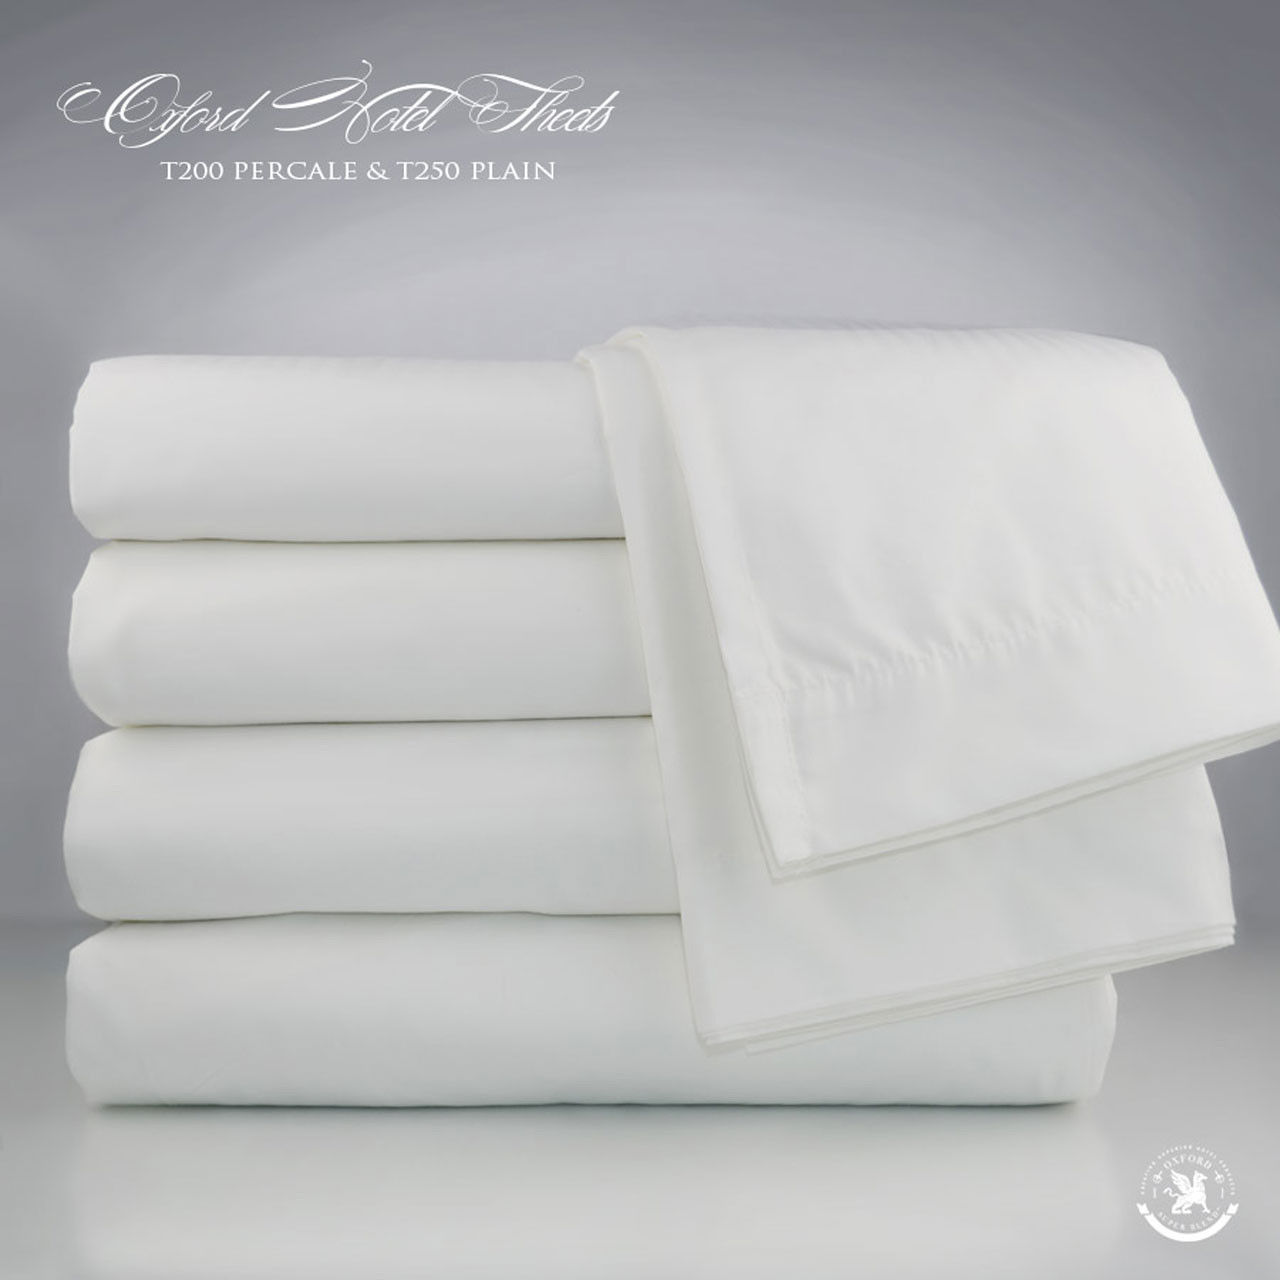 What weave type and thread count do the Oxford Superblend Bed Linens T-200, or oxford super blend sheets, feature?